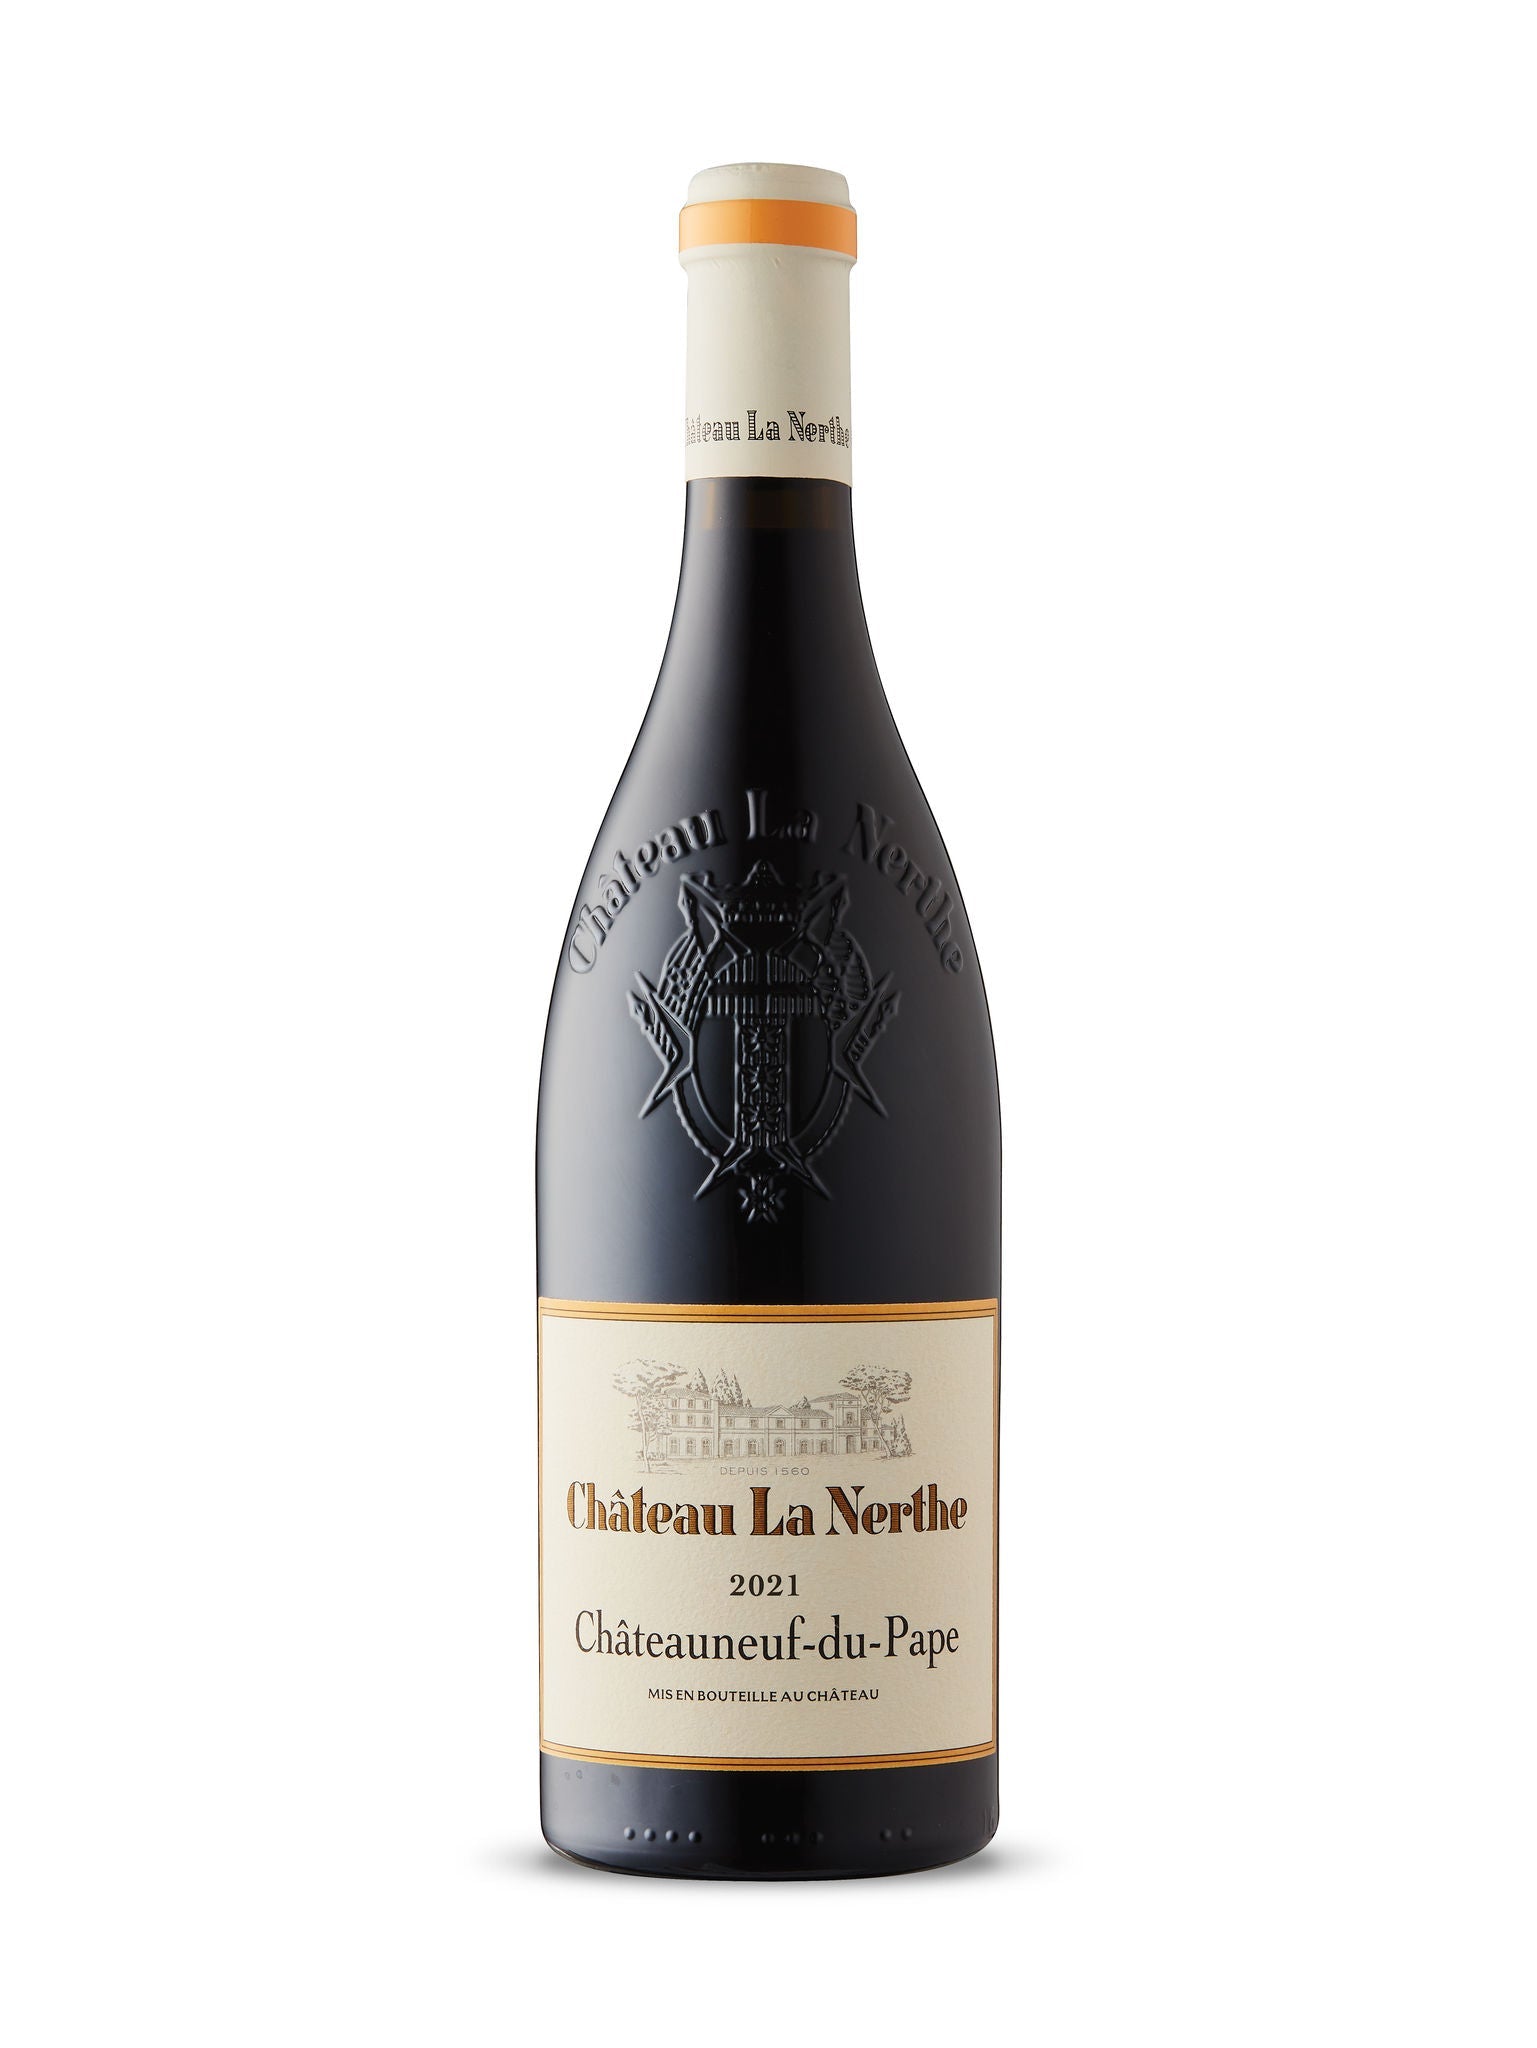 Château La Nerthe Châteauneuf-du-Pape 2021 | Exquisite Wine & Alcohol Gift Delivery Toronto Canada | Vyno